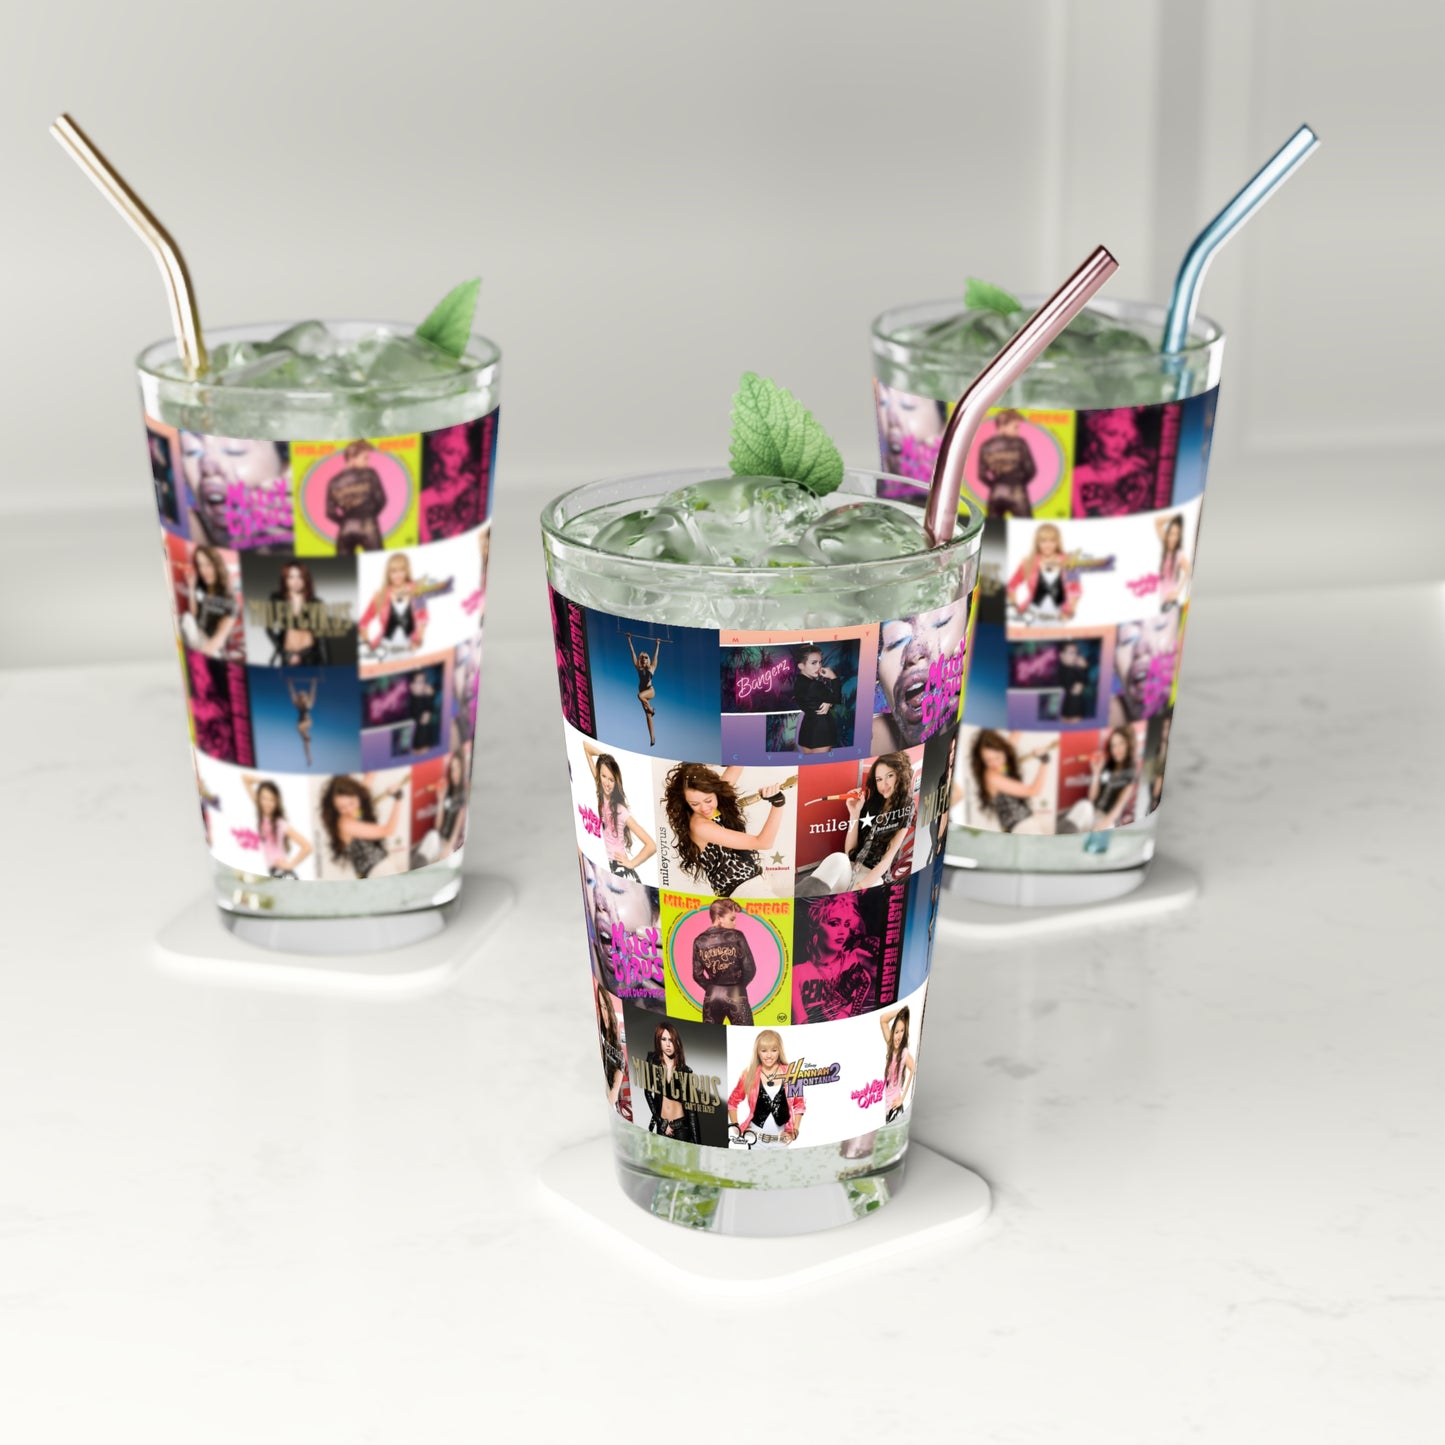 Miley Cyrus Album Cover Collage Pint Glass